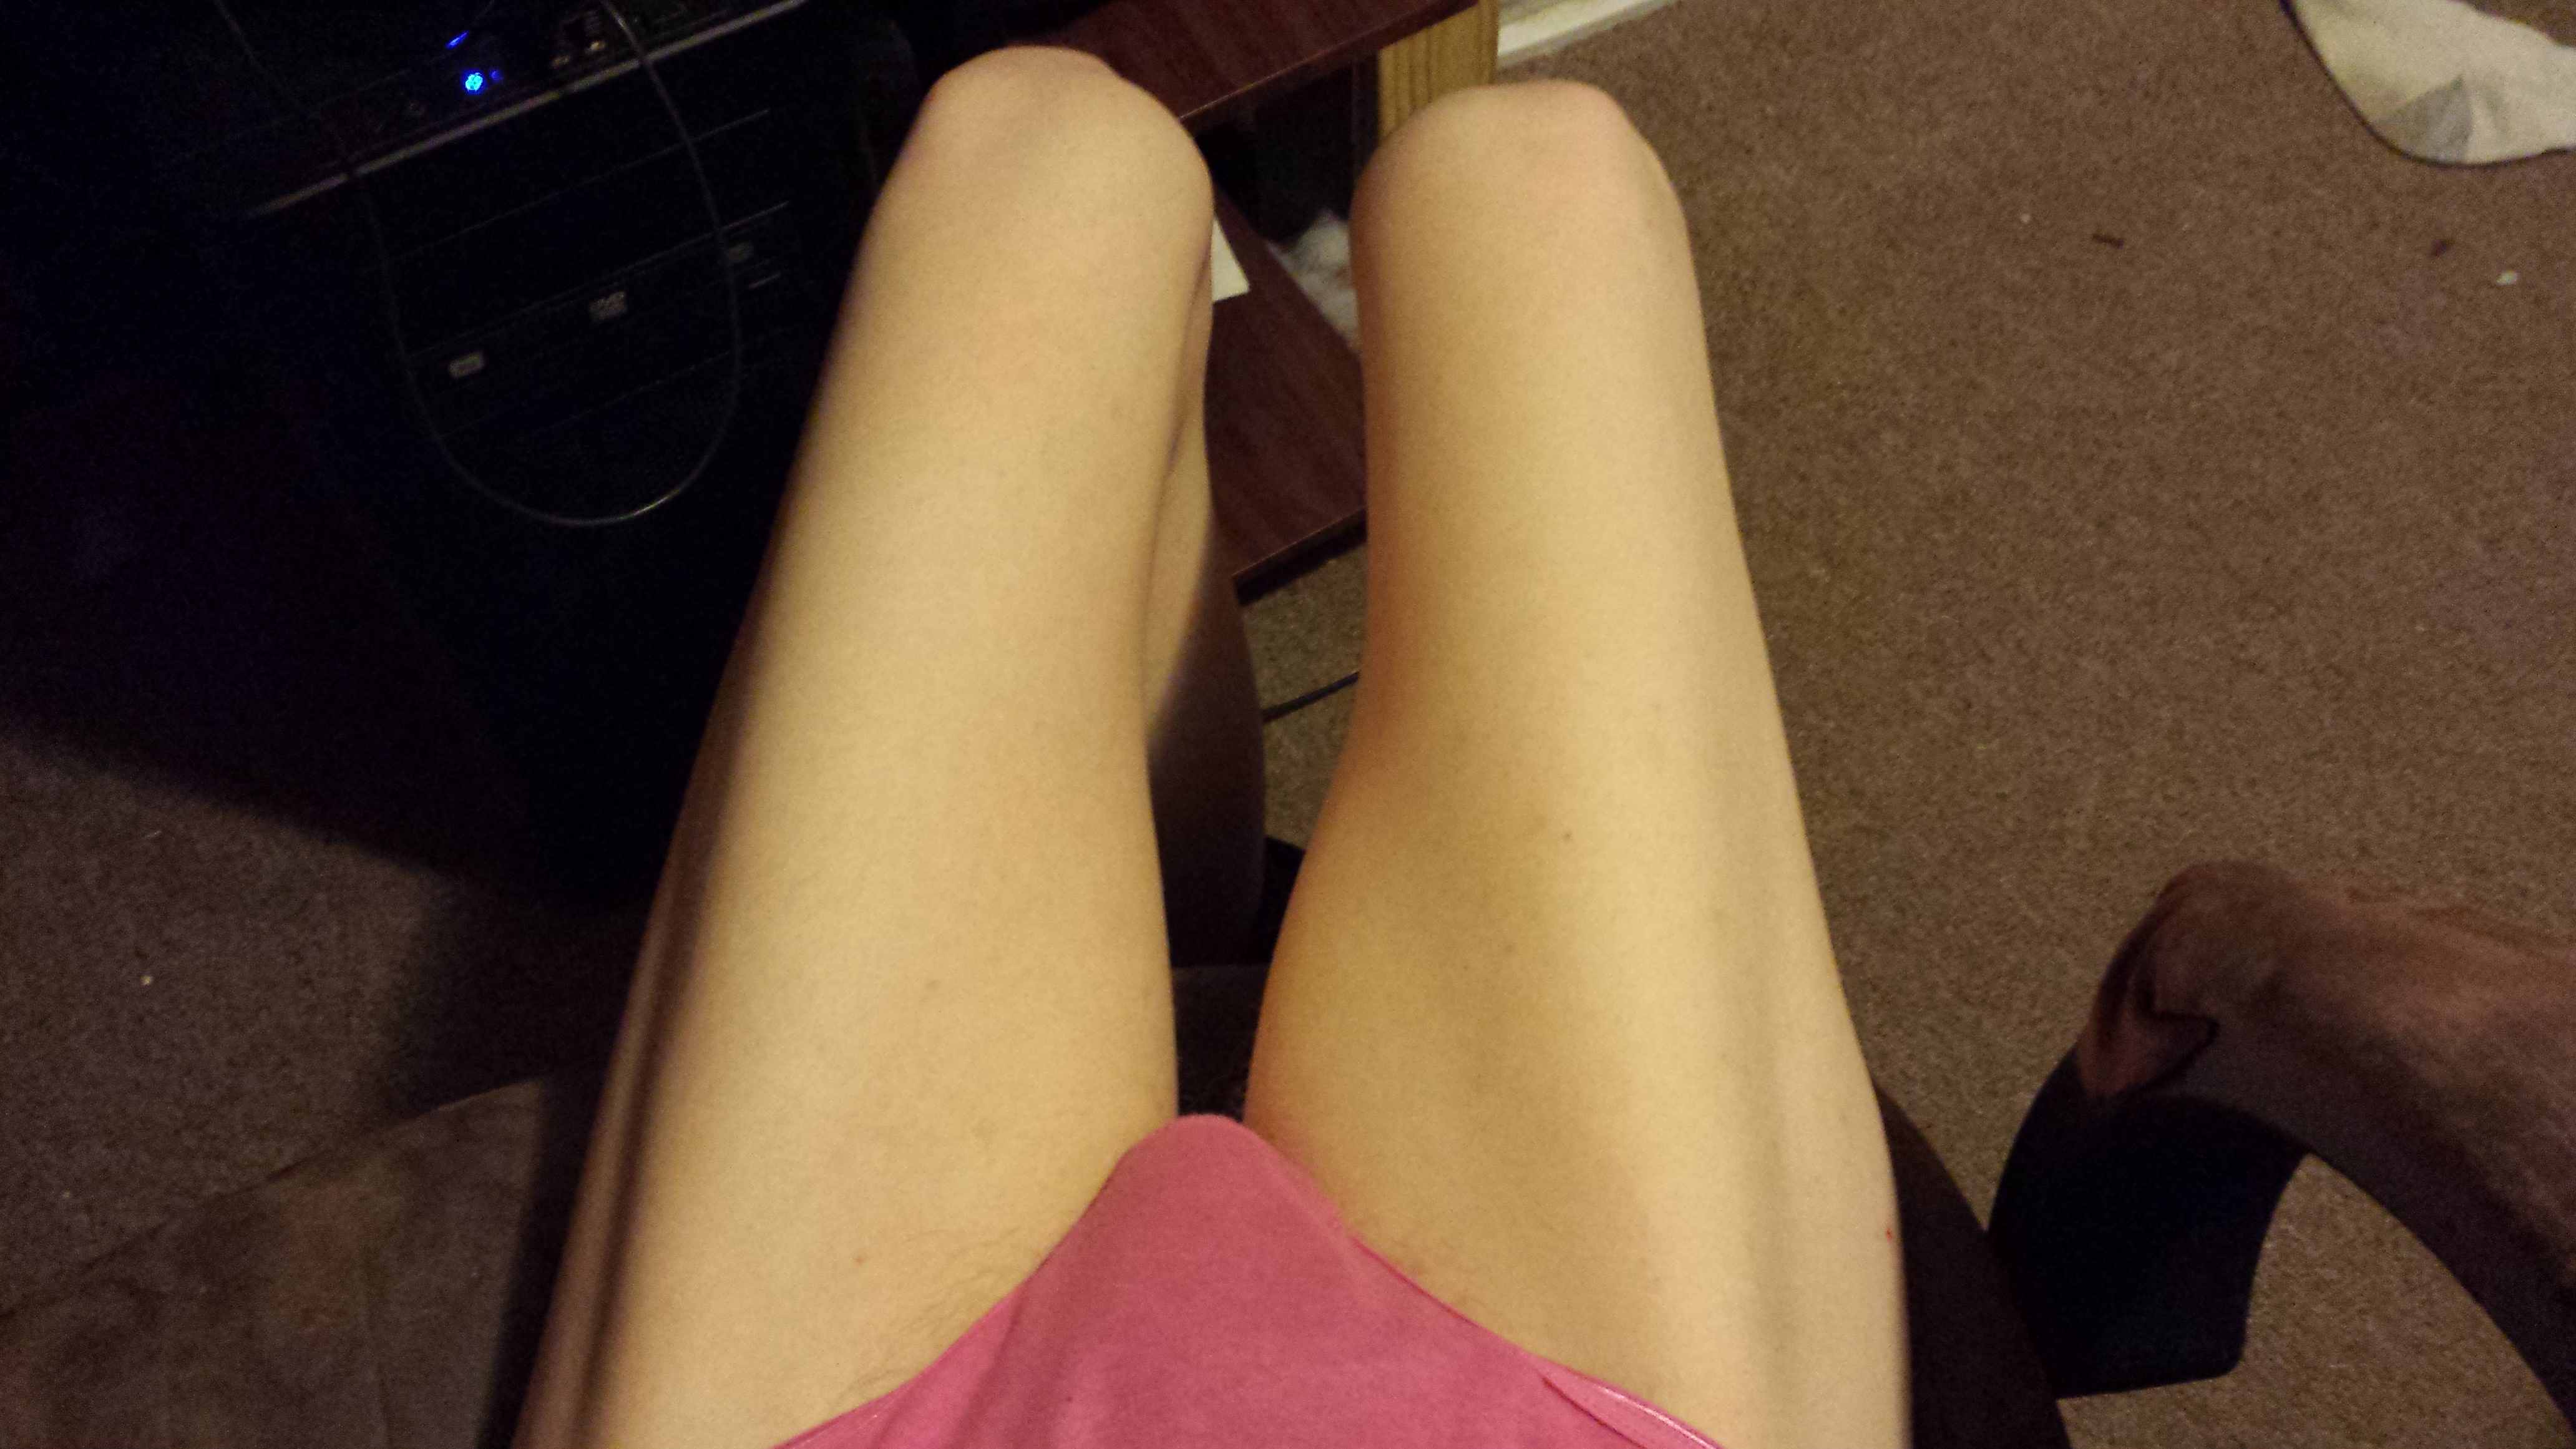 shaved again, with panties